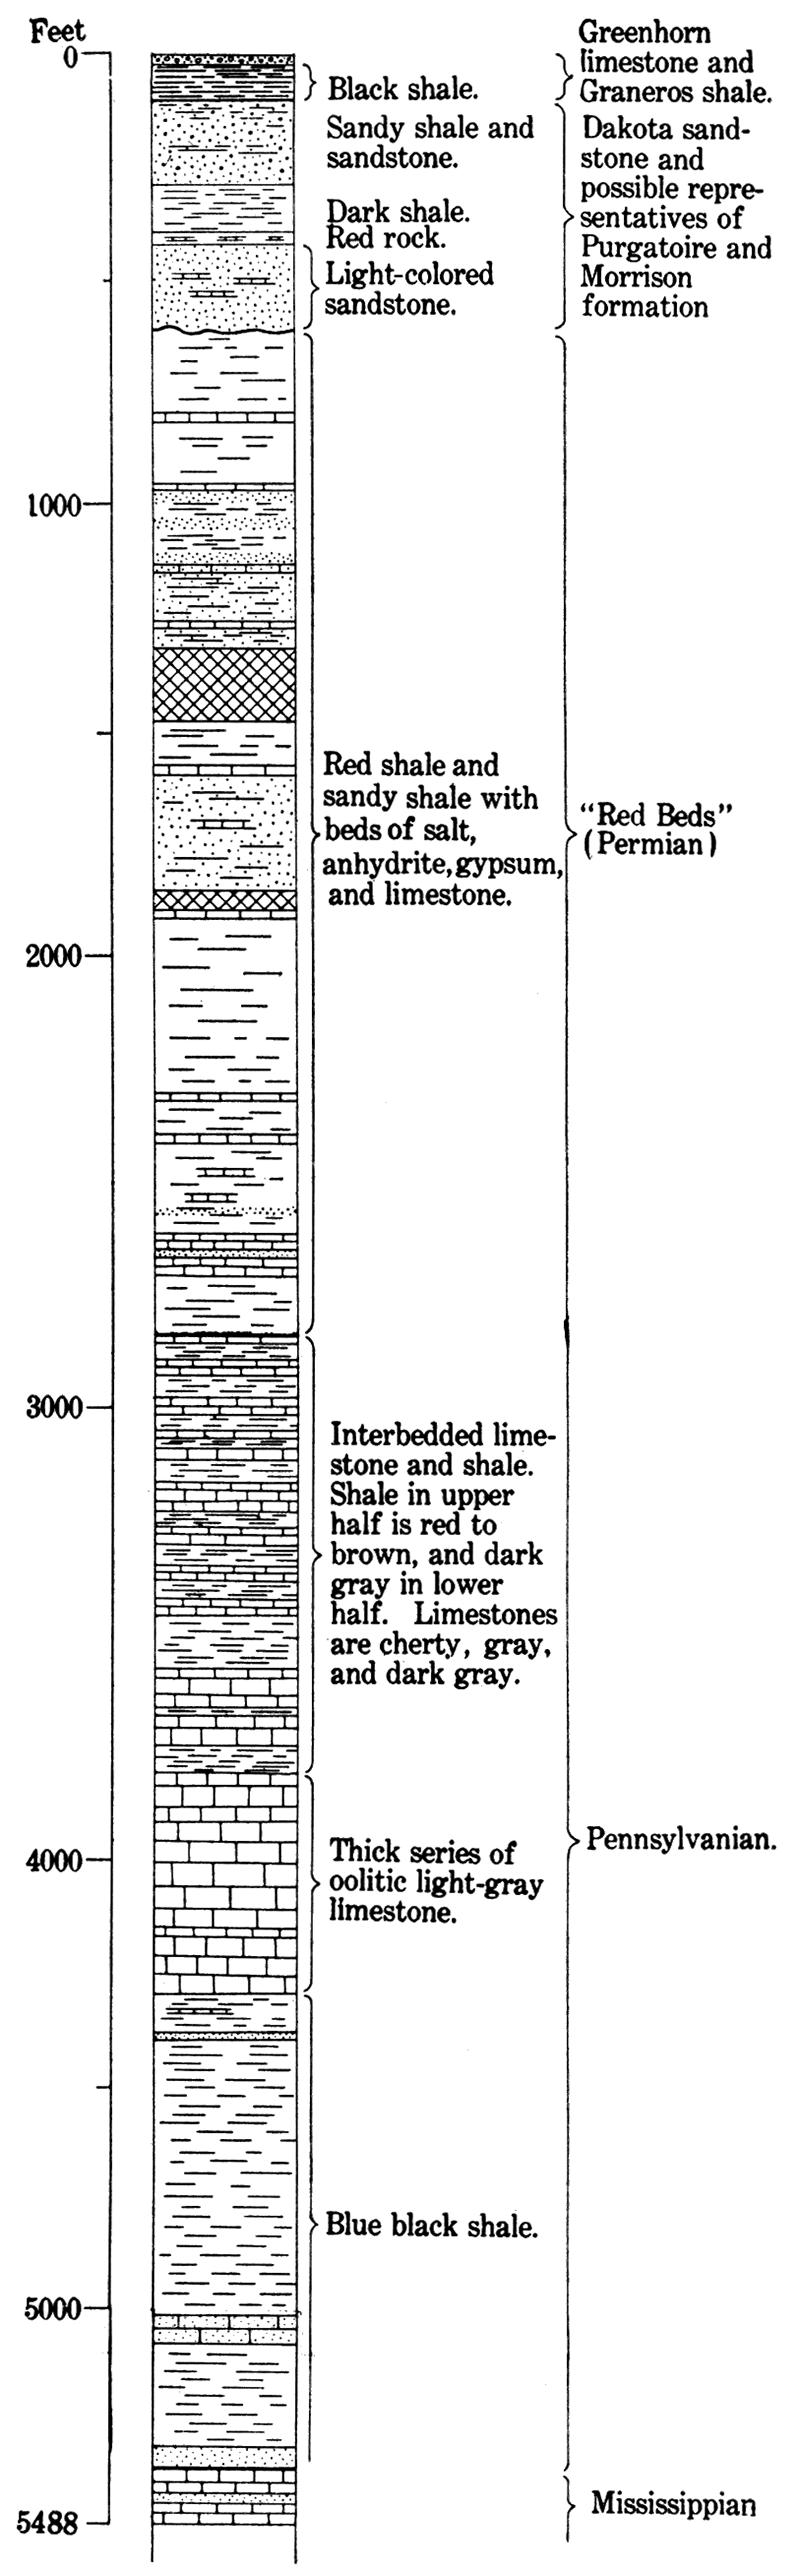 Generalized stratigraphic section of buried rocks of Hamilton County, Kansas.